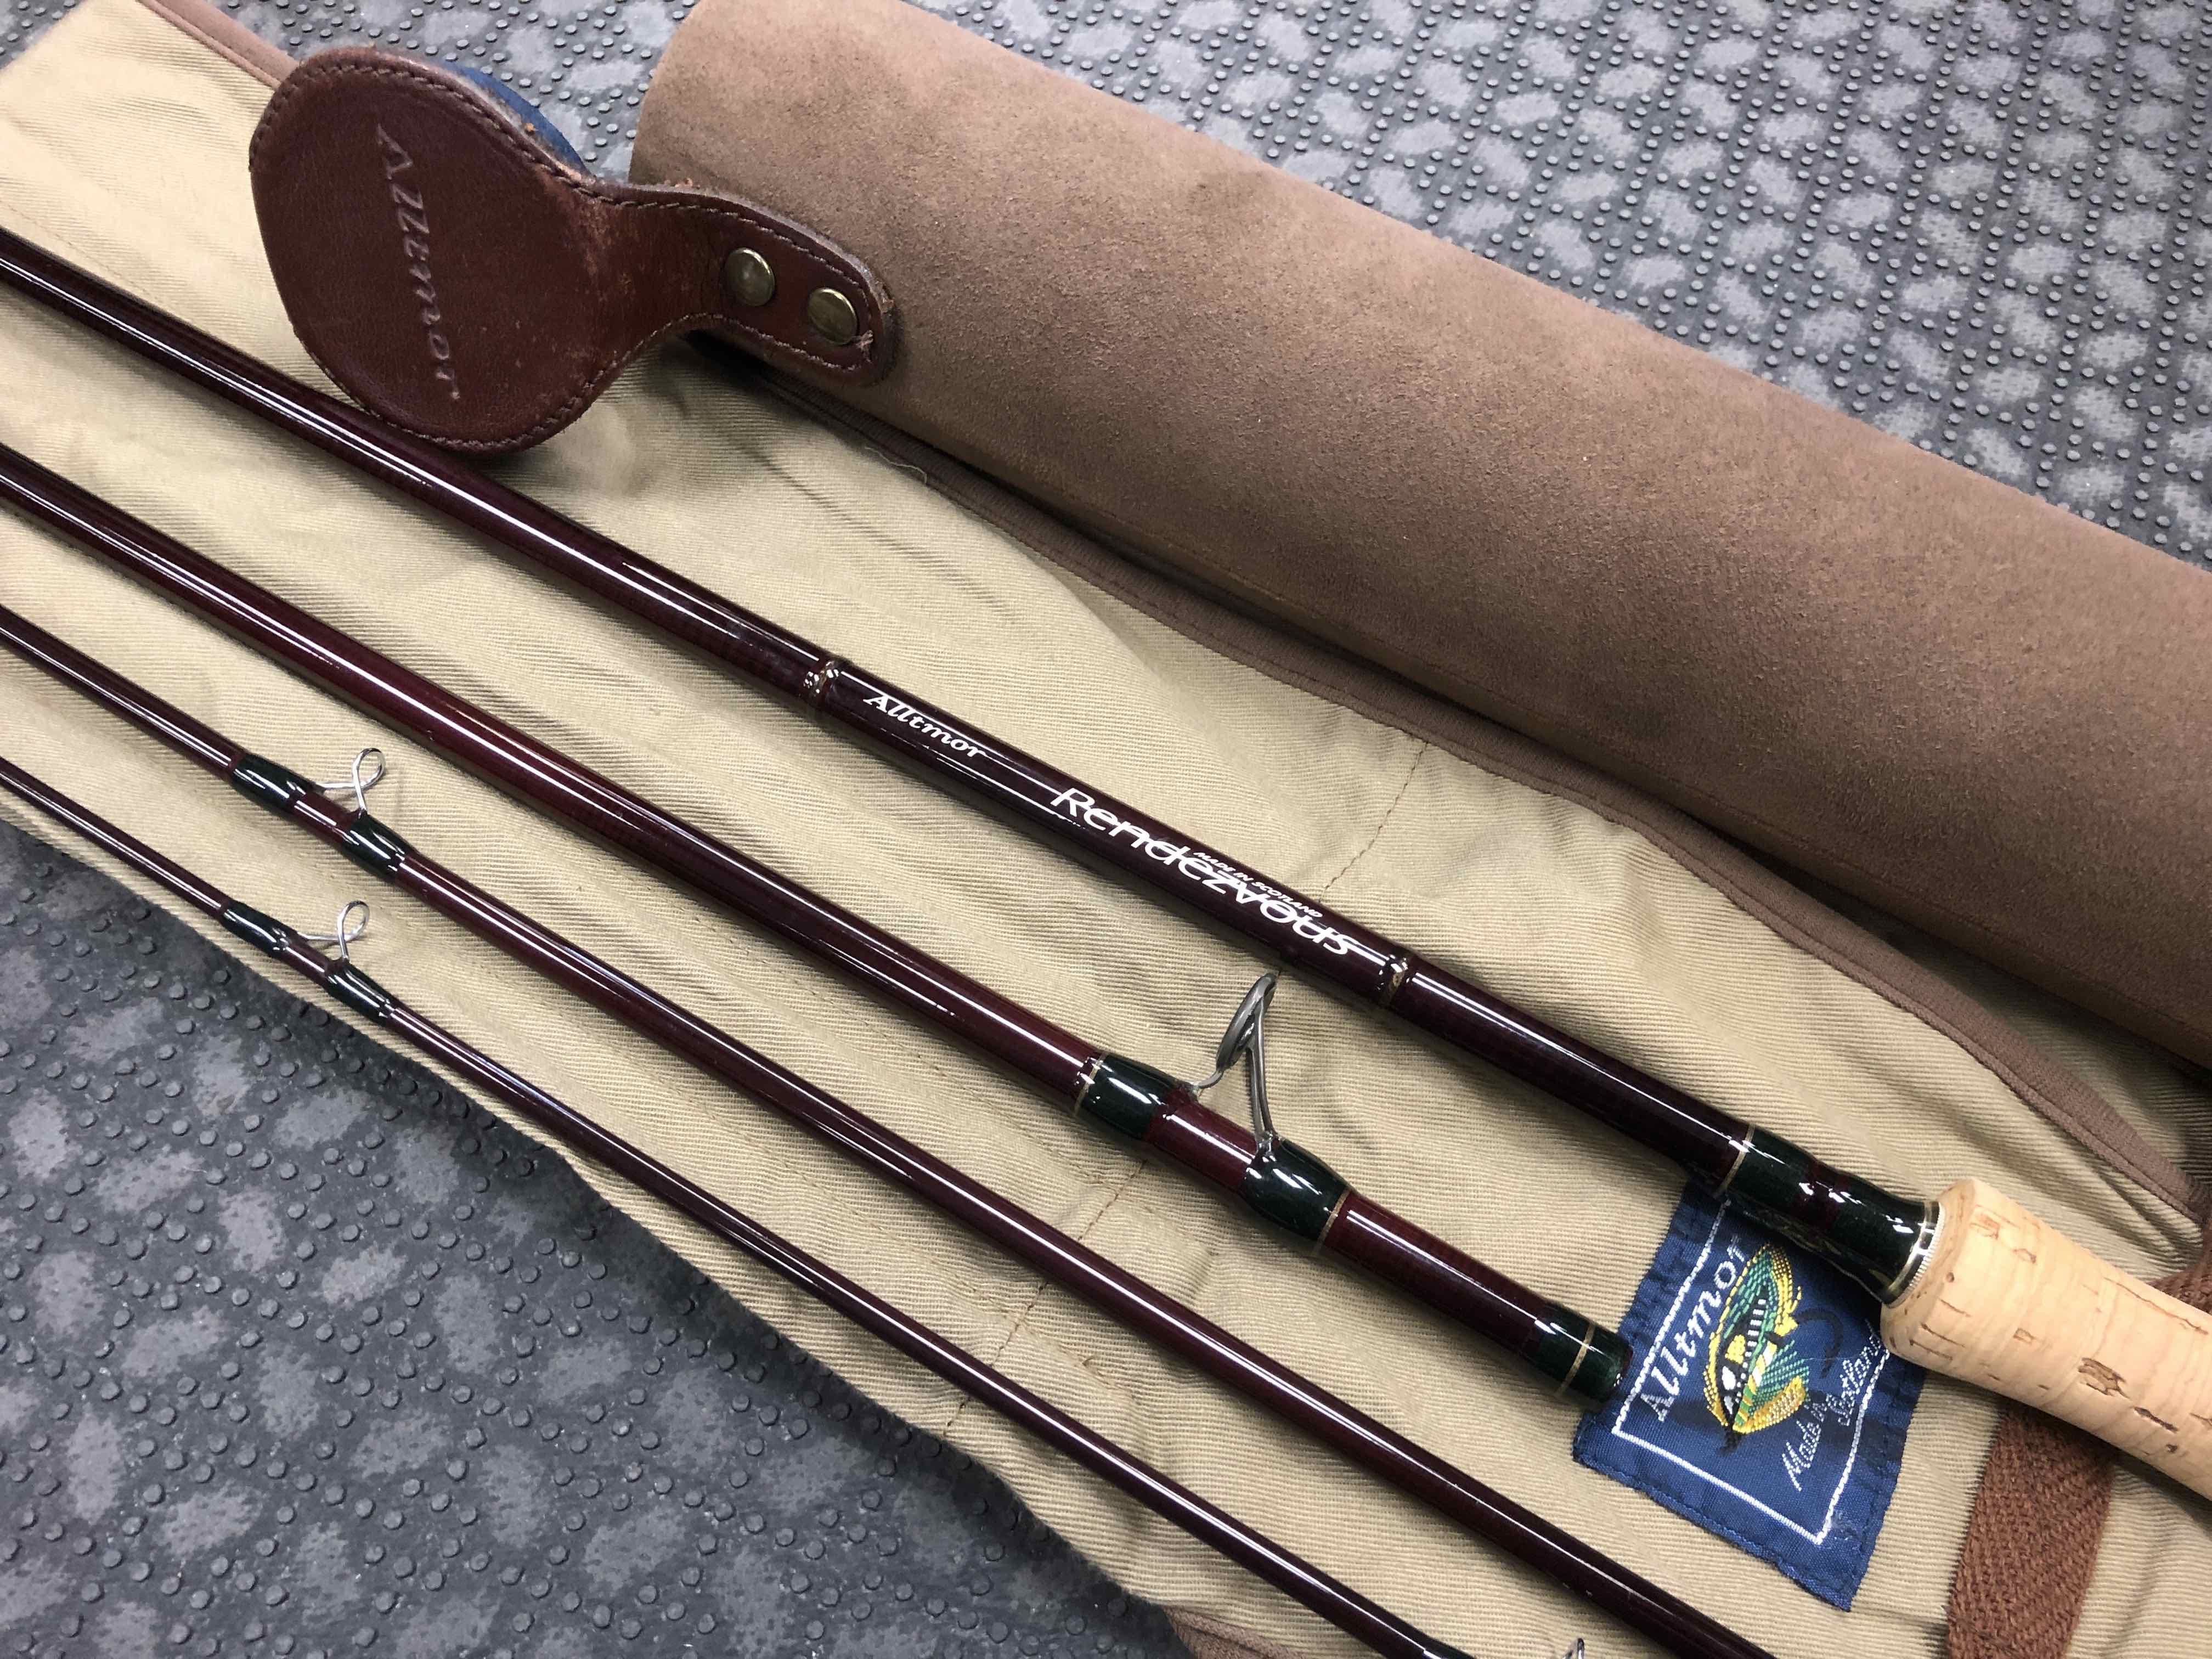 Daiwa Alltmor Rendezvous - AME10084 - 10’ 7-9Wt Fly Rod - LIKE NEW! - $120